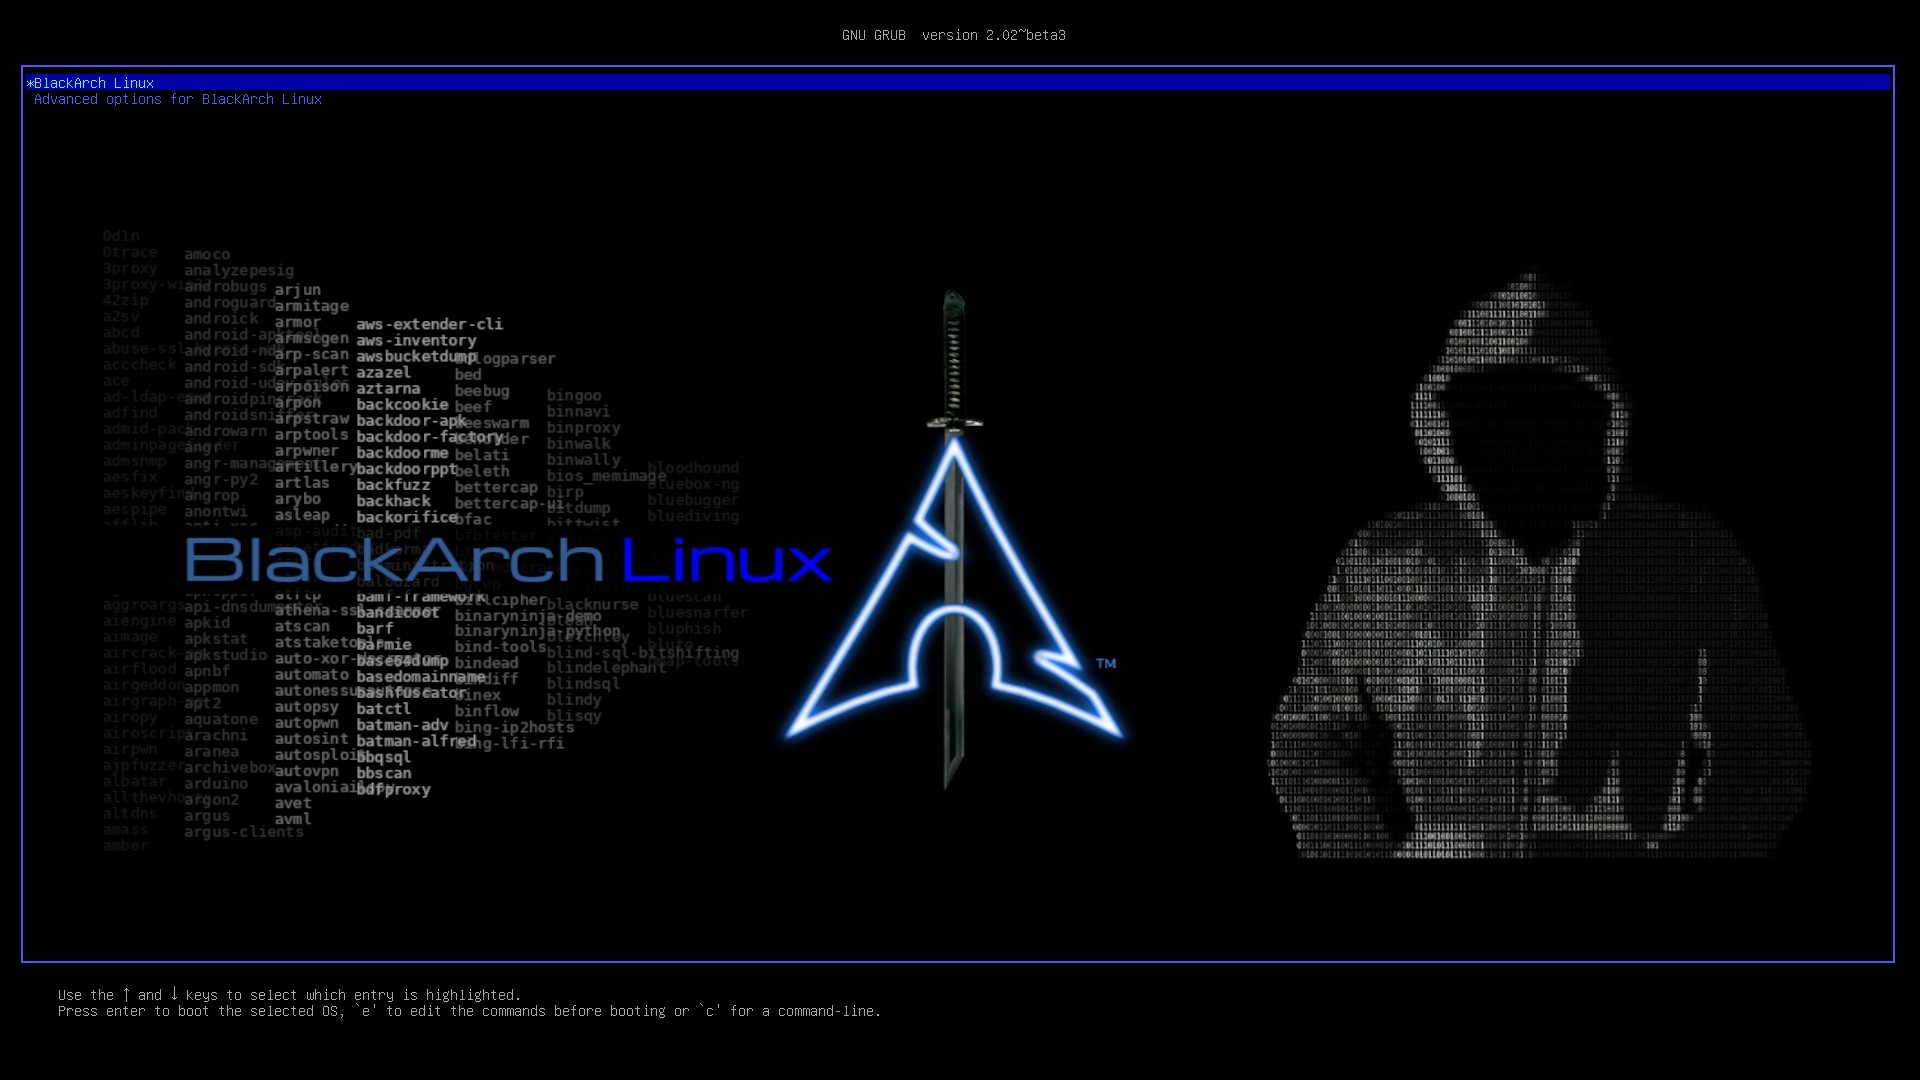 BlackArch Linux Ethical Hacking OS Gets First 2020 Release with 120 New